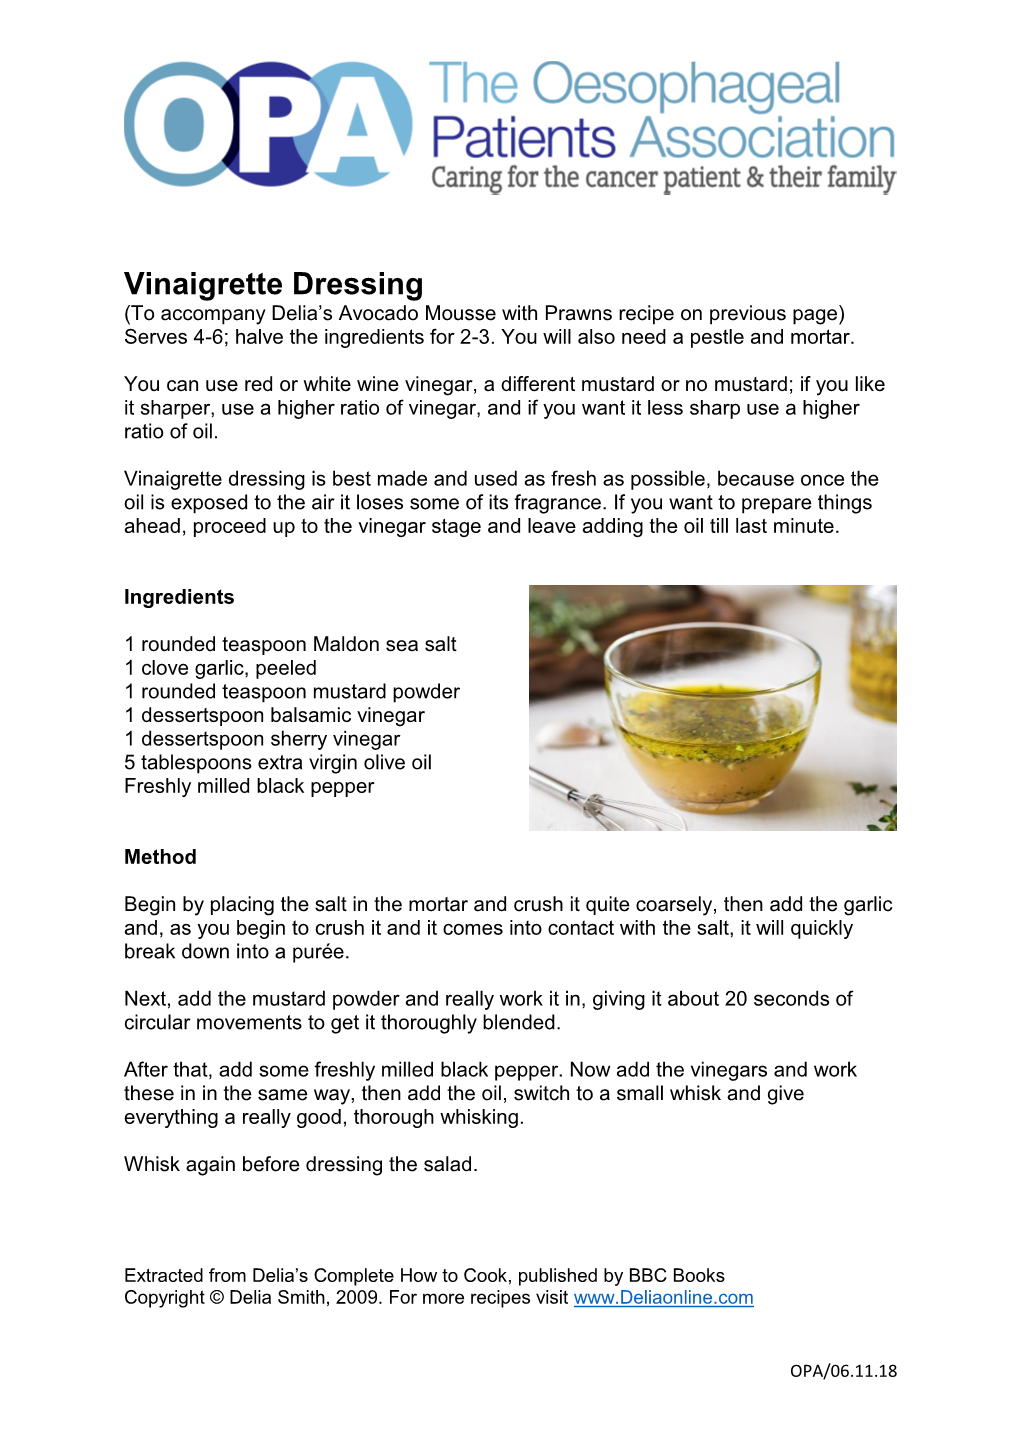 Vinaigrette Dressing (To Accompany Delia’S Avocado Mousse with Prawns Recipe on Previous Page) Serves 4-6; Halve the Ingredients for 2-3